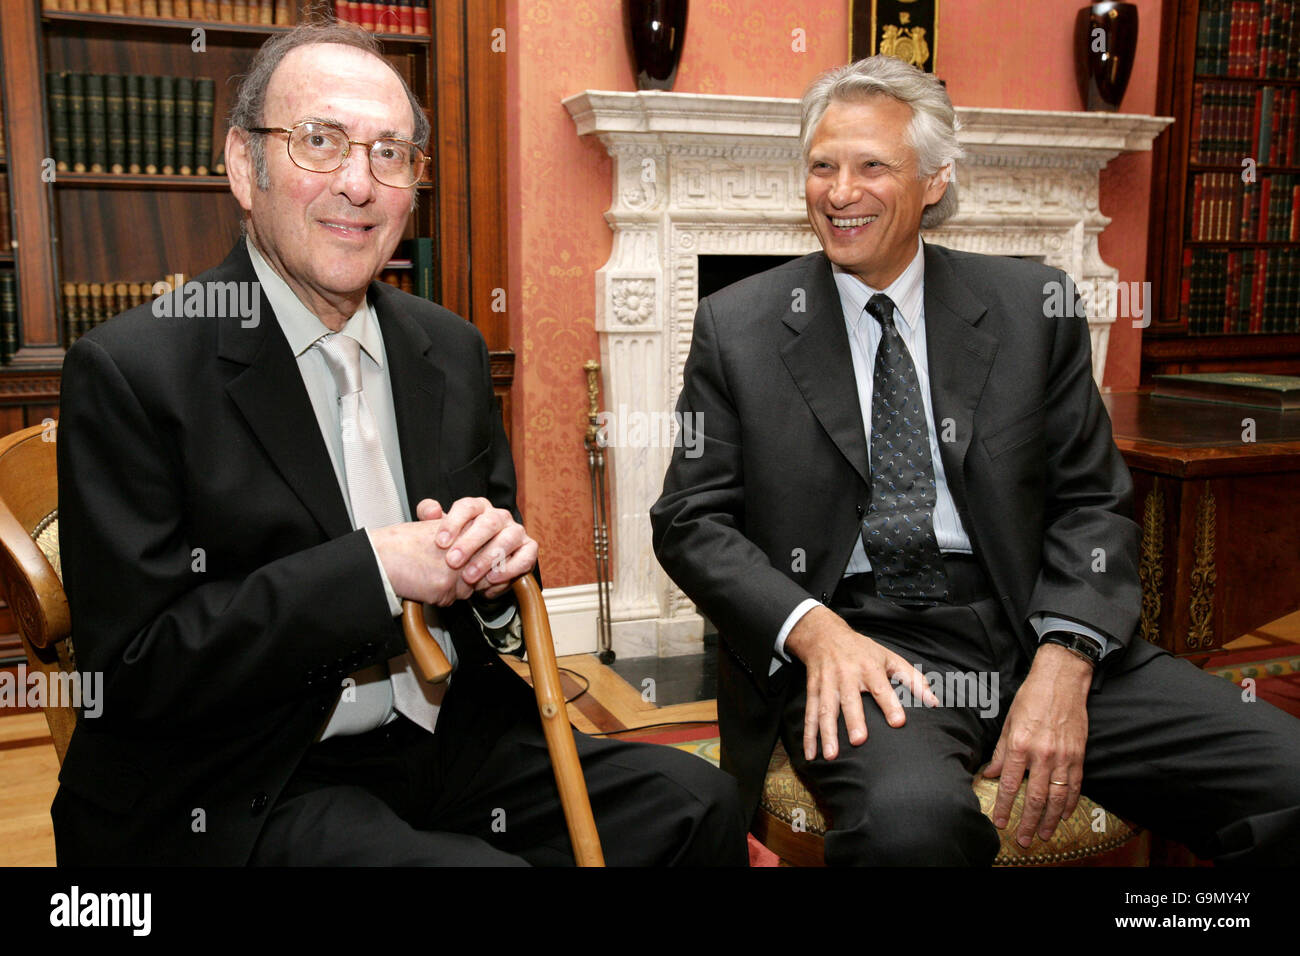 Nobel-winning British playwright Harold Pinter (left) shares a joke with French Prime Minister Dominique de Villepin (right) after being awarded the French Legion d'honneur at the French Embassy in London. Stock Photo